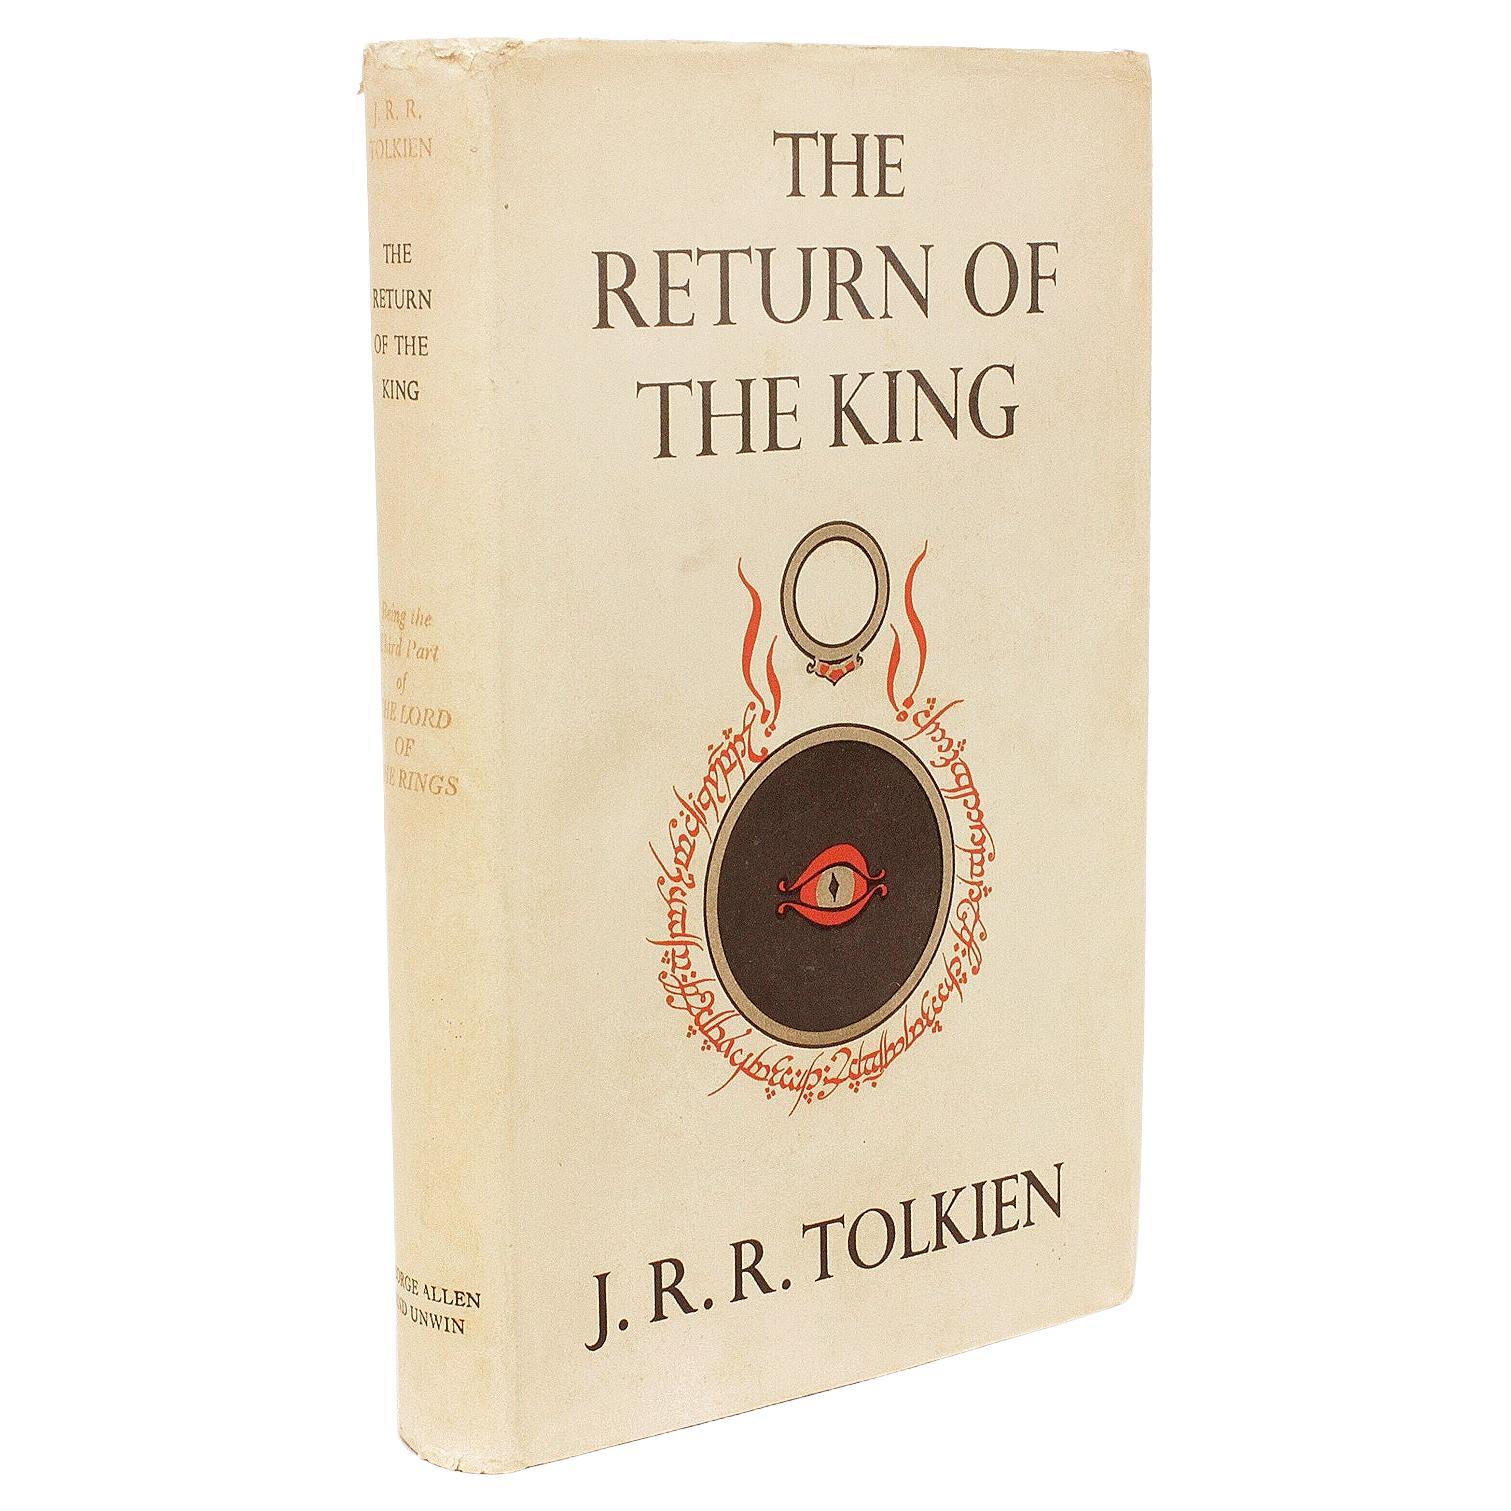 TOLKIEN, J. R. R. - The Return Of The King - 1955 - FIRST EDITION FIRST STATE